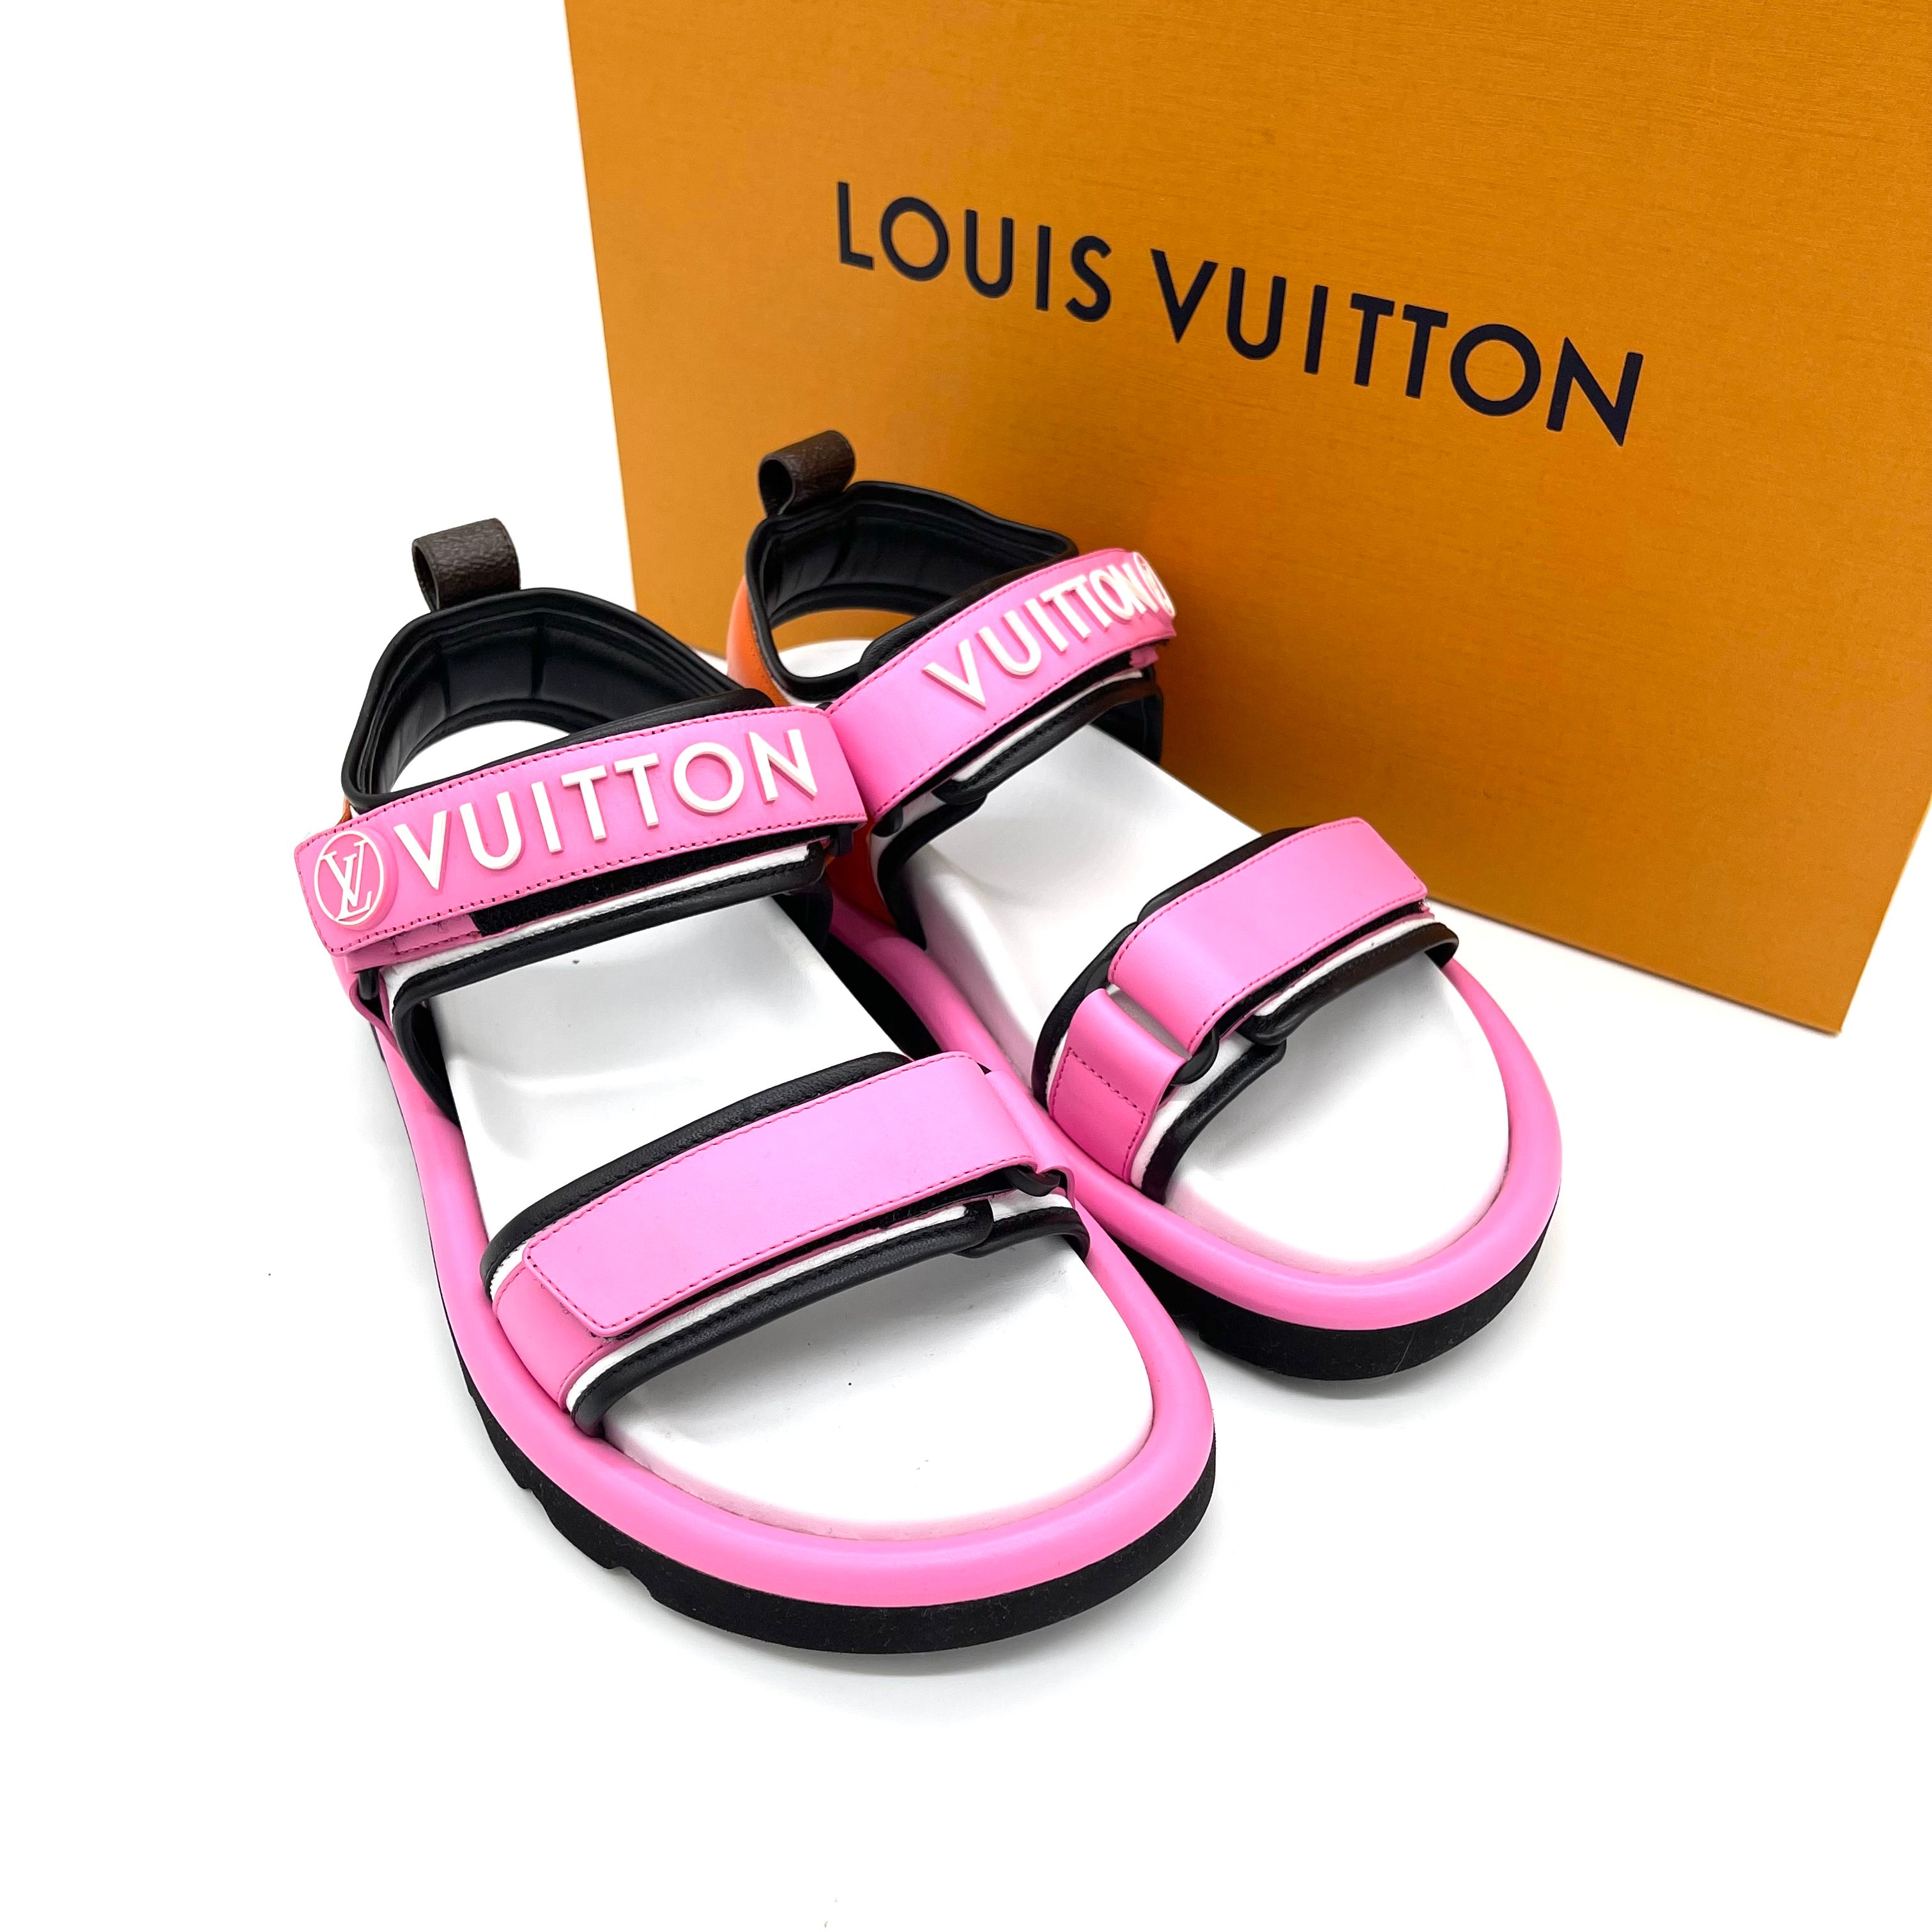 LOUIS VUITTON
Calfskin Pool Pillow Flat Comfort Sandals 37 Rose Pop Pink Brand new condition Never used